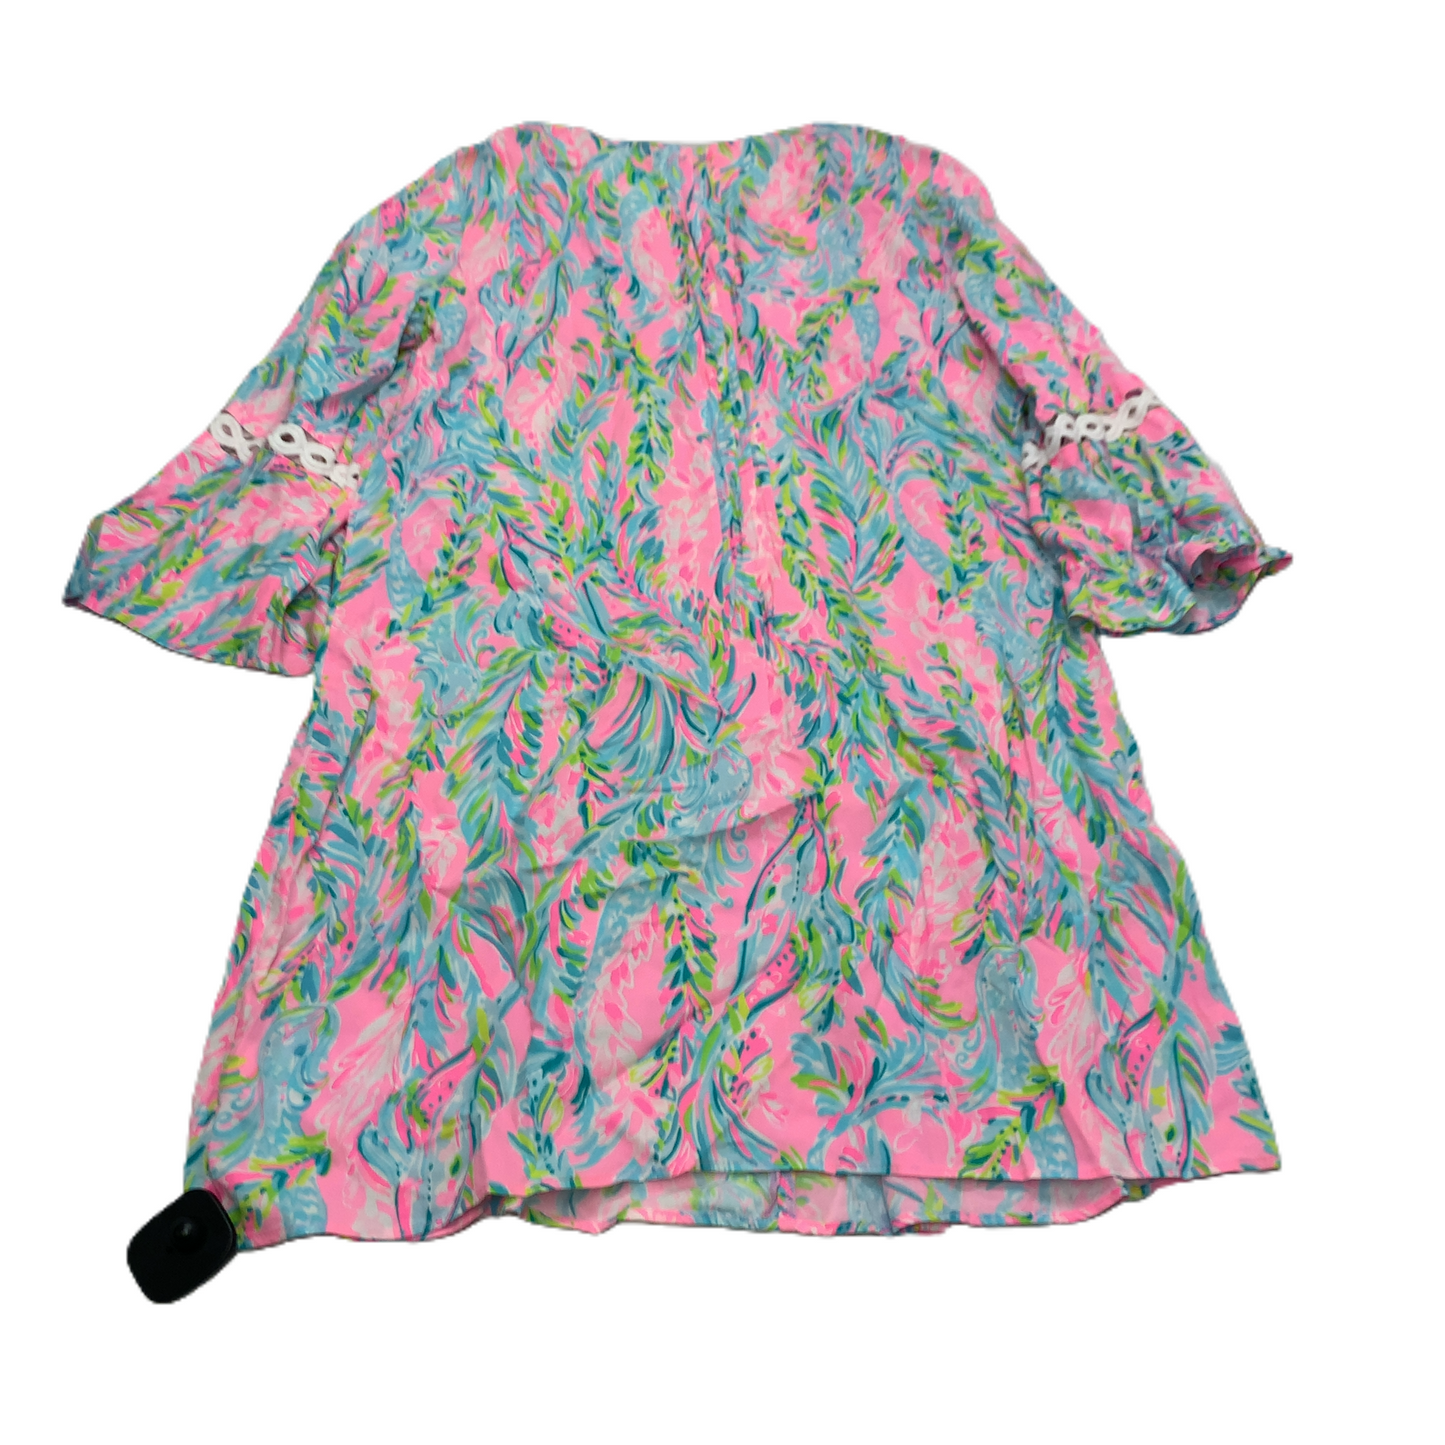 Blue & Pink  Dress Designer By Lilly Pulitzer  Size: M